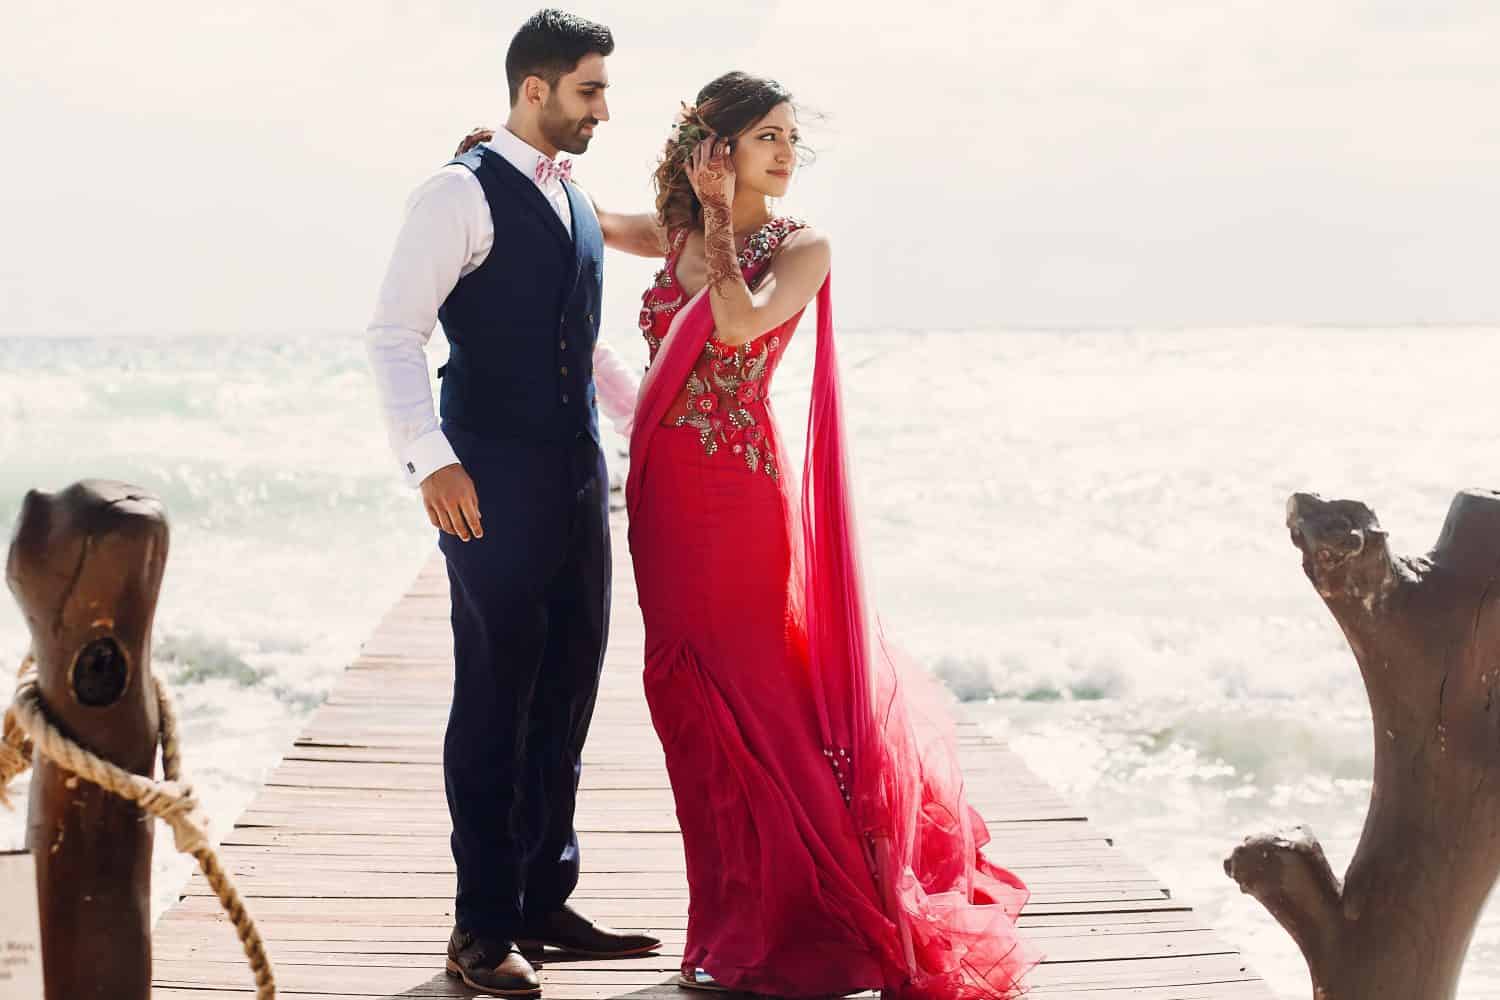 Wind blows bride's pink sari while she stands with Hindu groom on a wooden quay among foaming waves